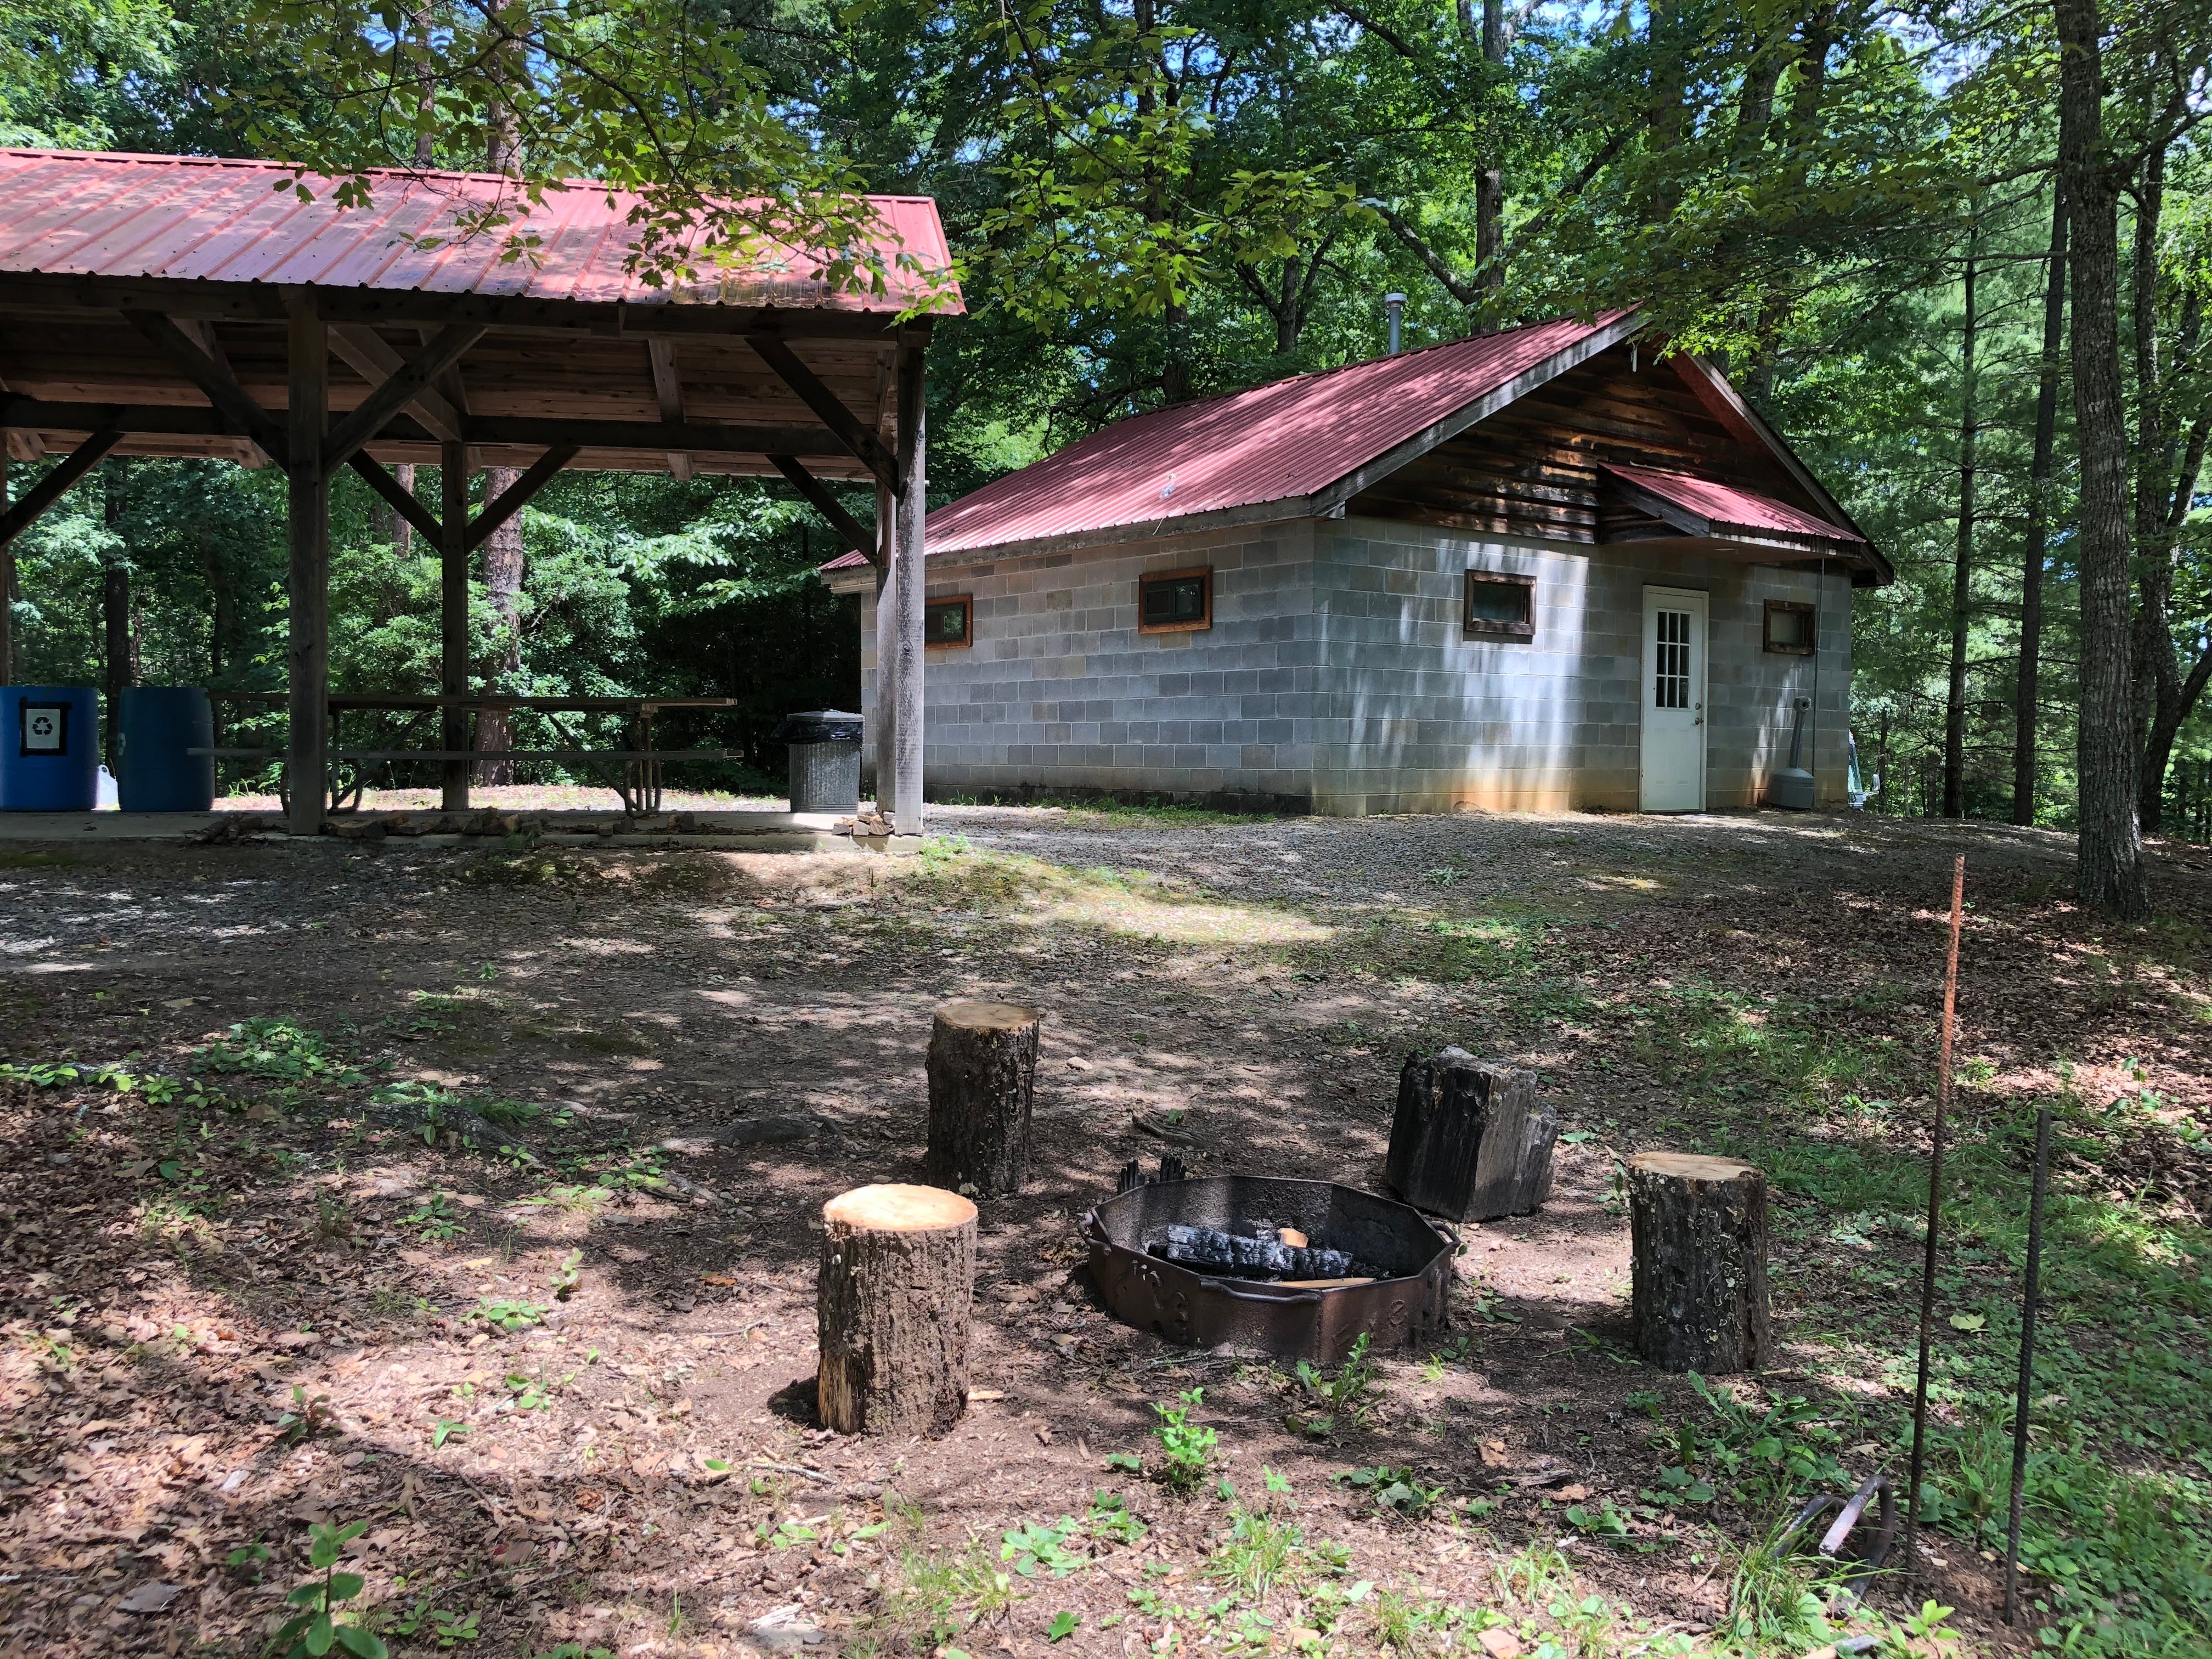 Bathhouse, pavilion, and community fire ring.